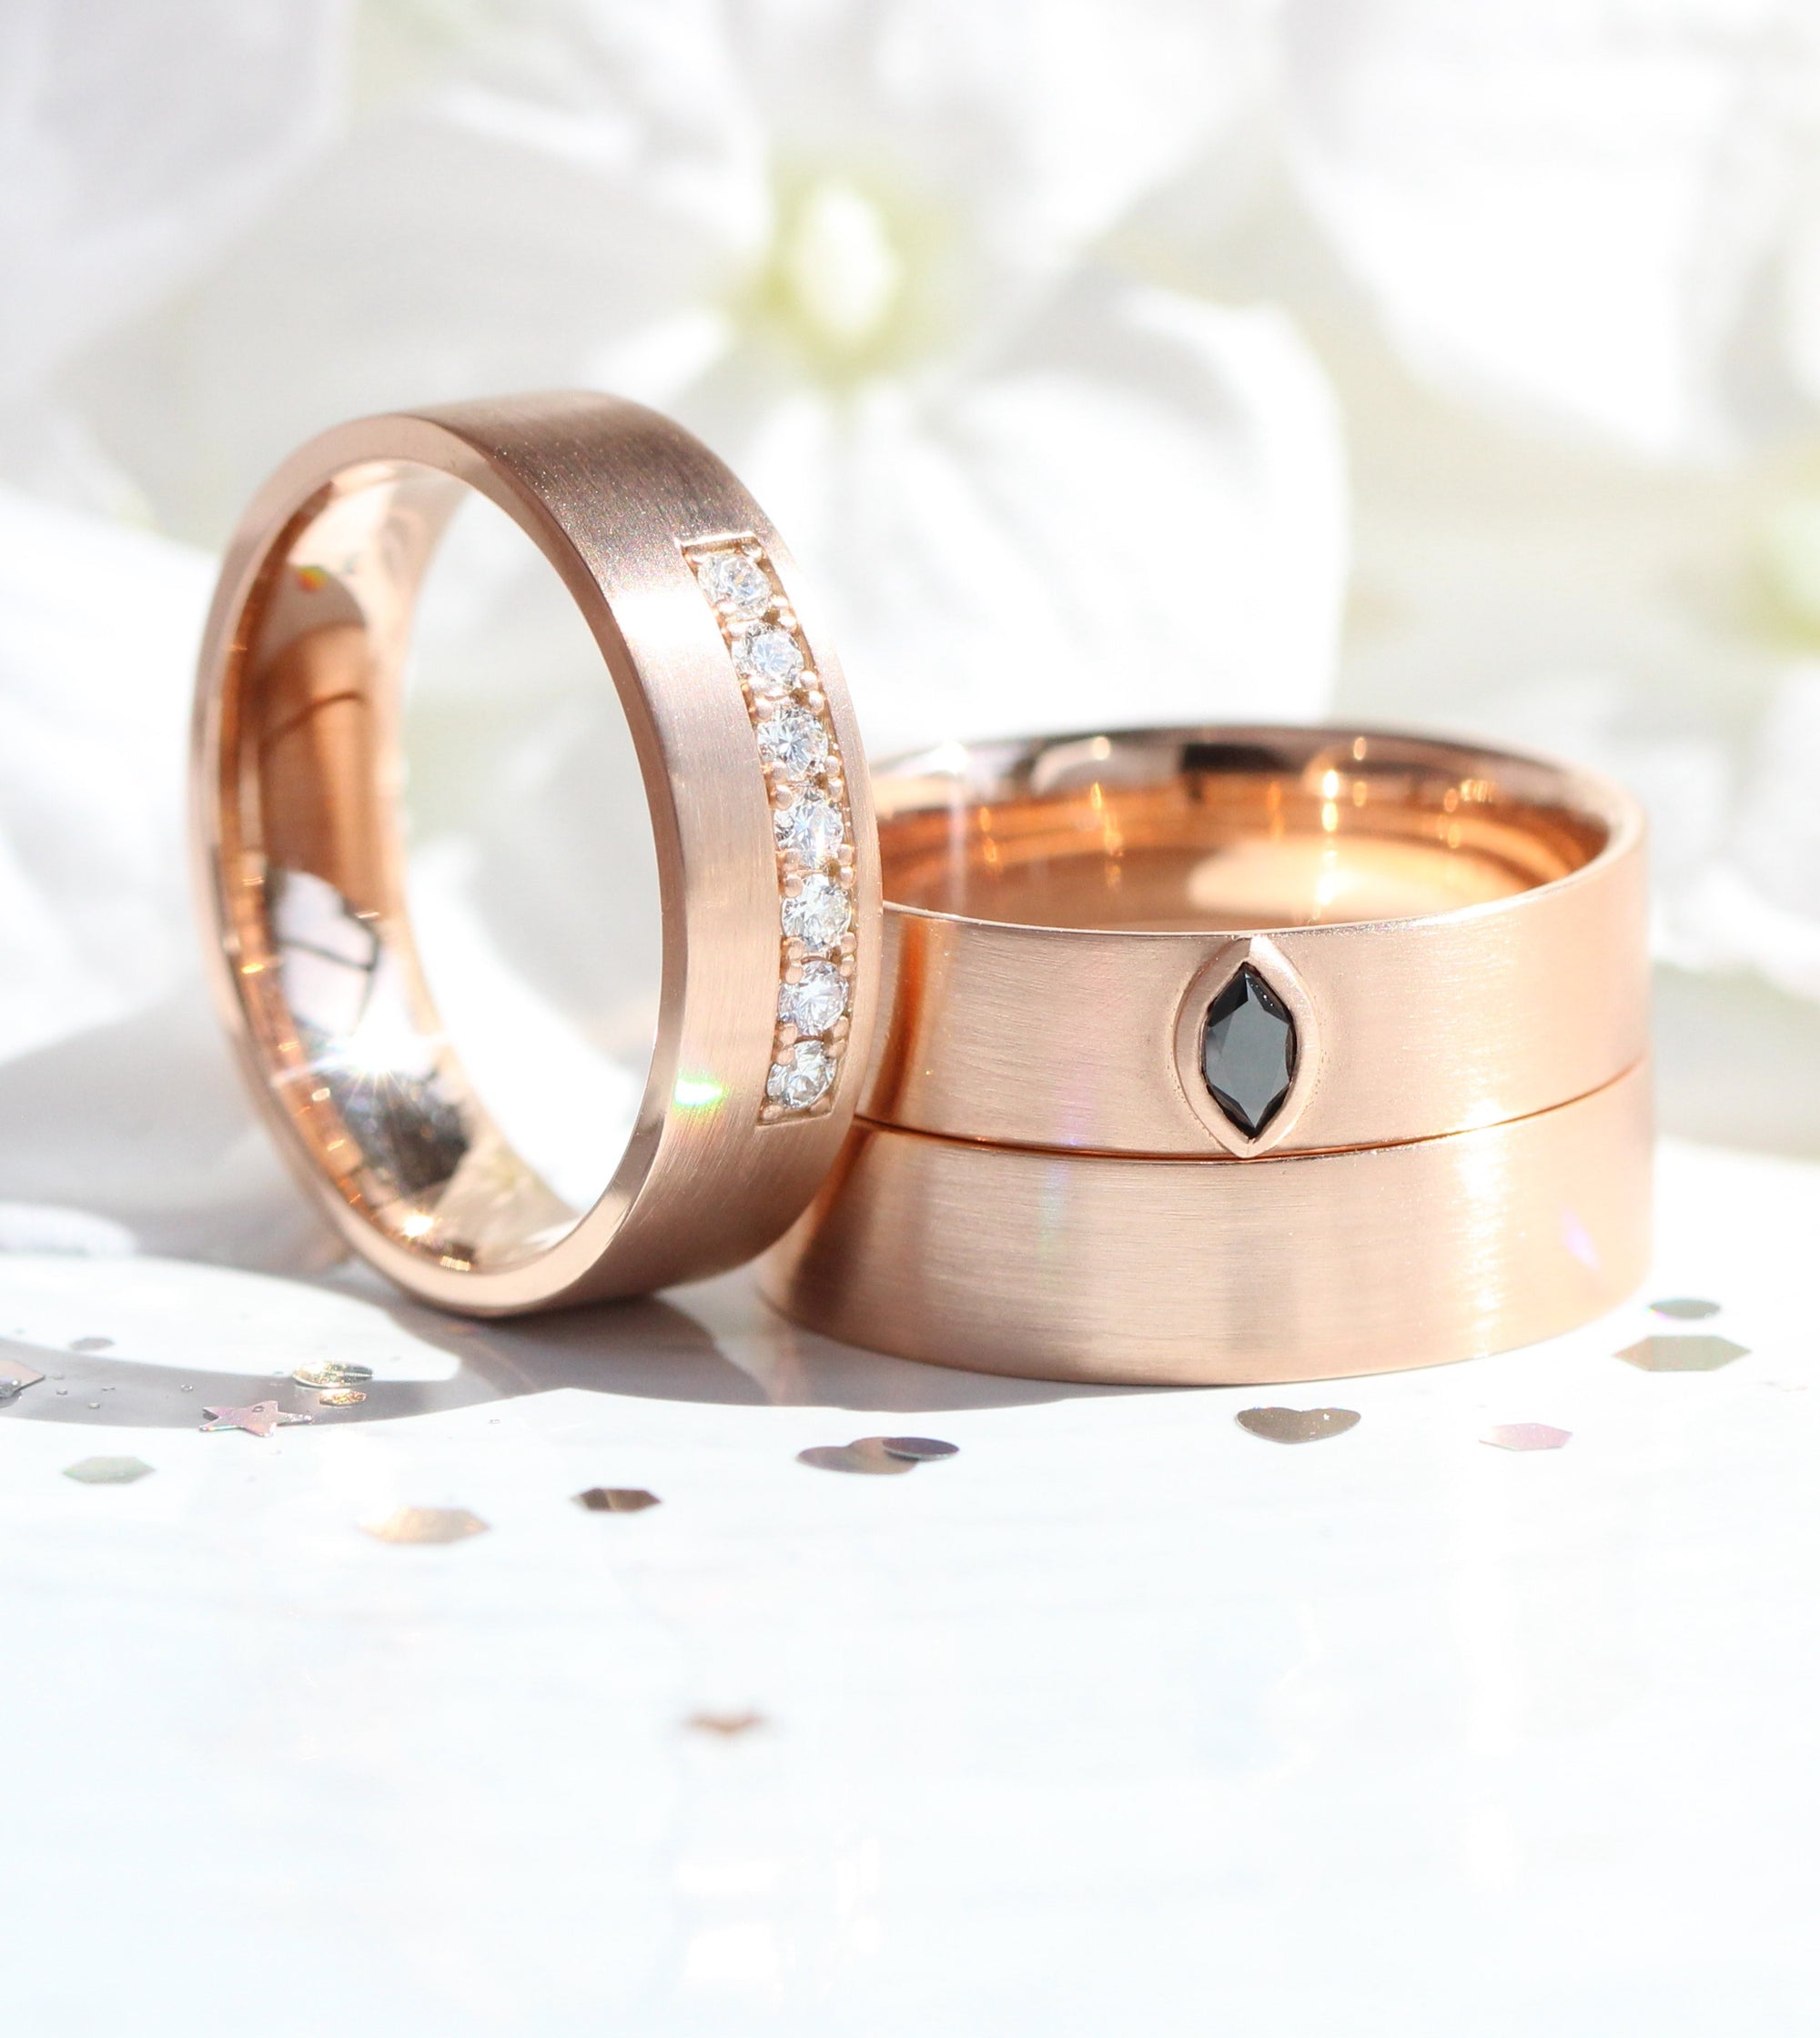 Men’s wedding bands, gender neutral rings, unisex wedding rings, his and her wedding ring sets La More Design Jewelry